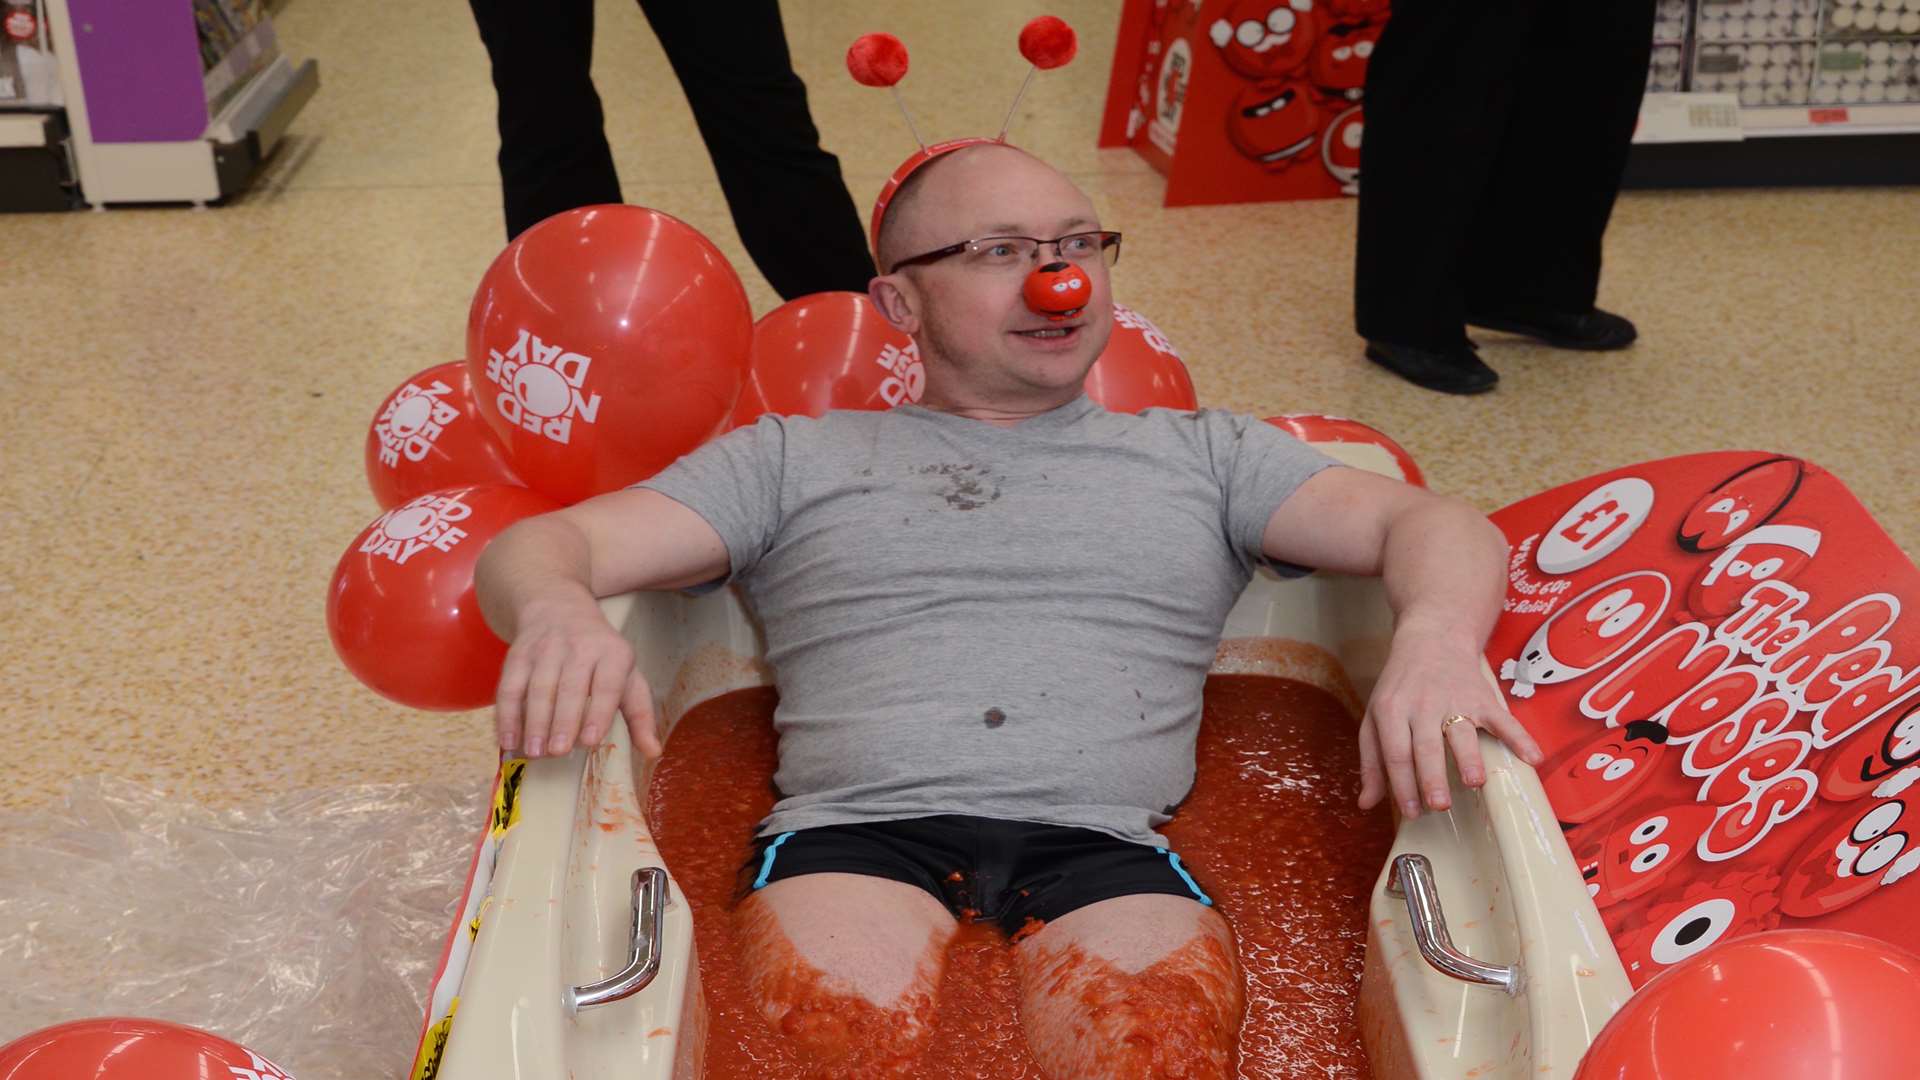 Simon Cadier is the first to brave a bathe in tomatoes